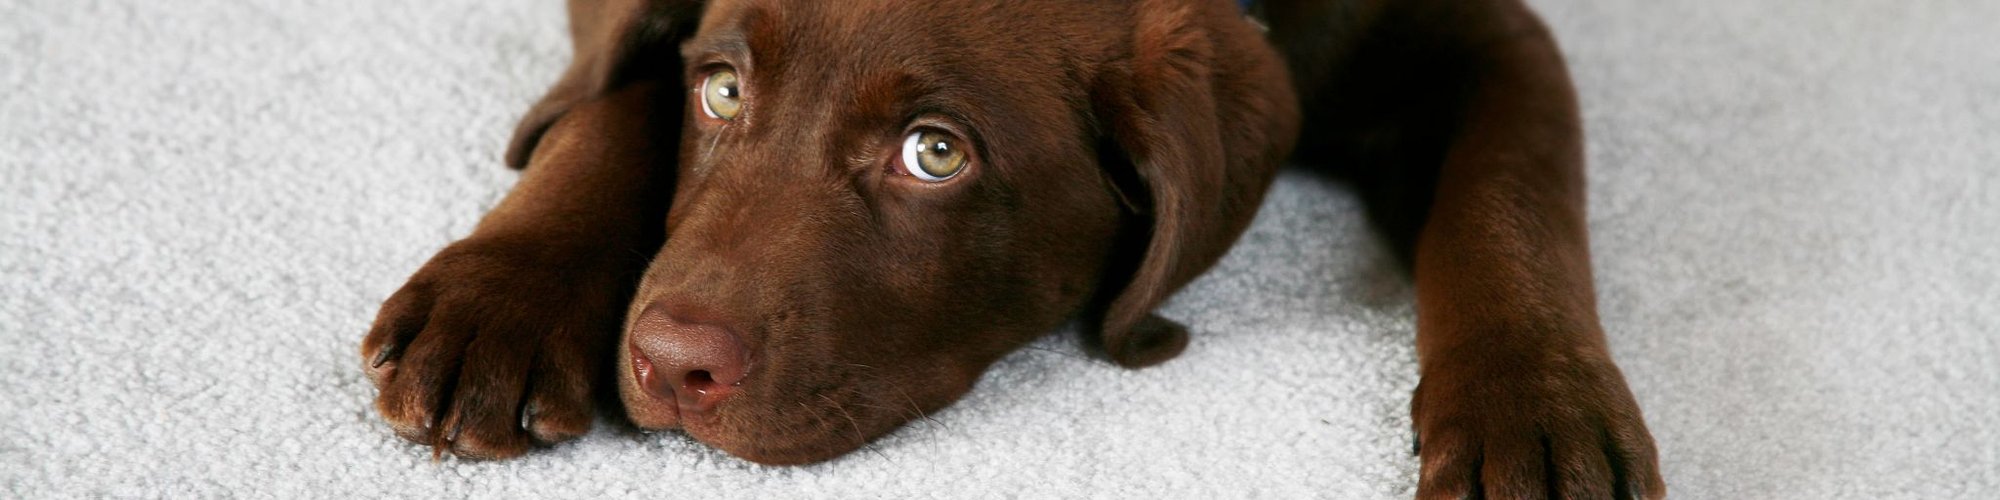 Pet Friendly Carpets Hero banner Image Featuring A Relaxed Chocolate-Coloured Labrador Retriever